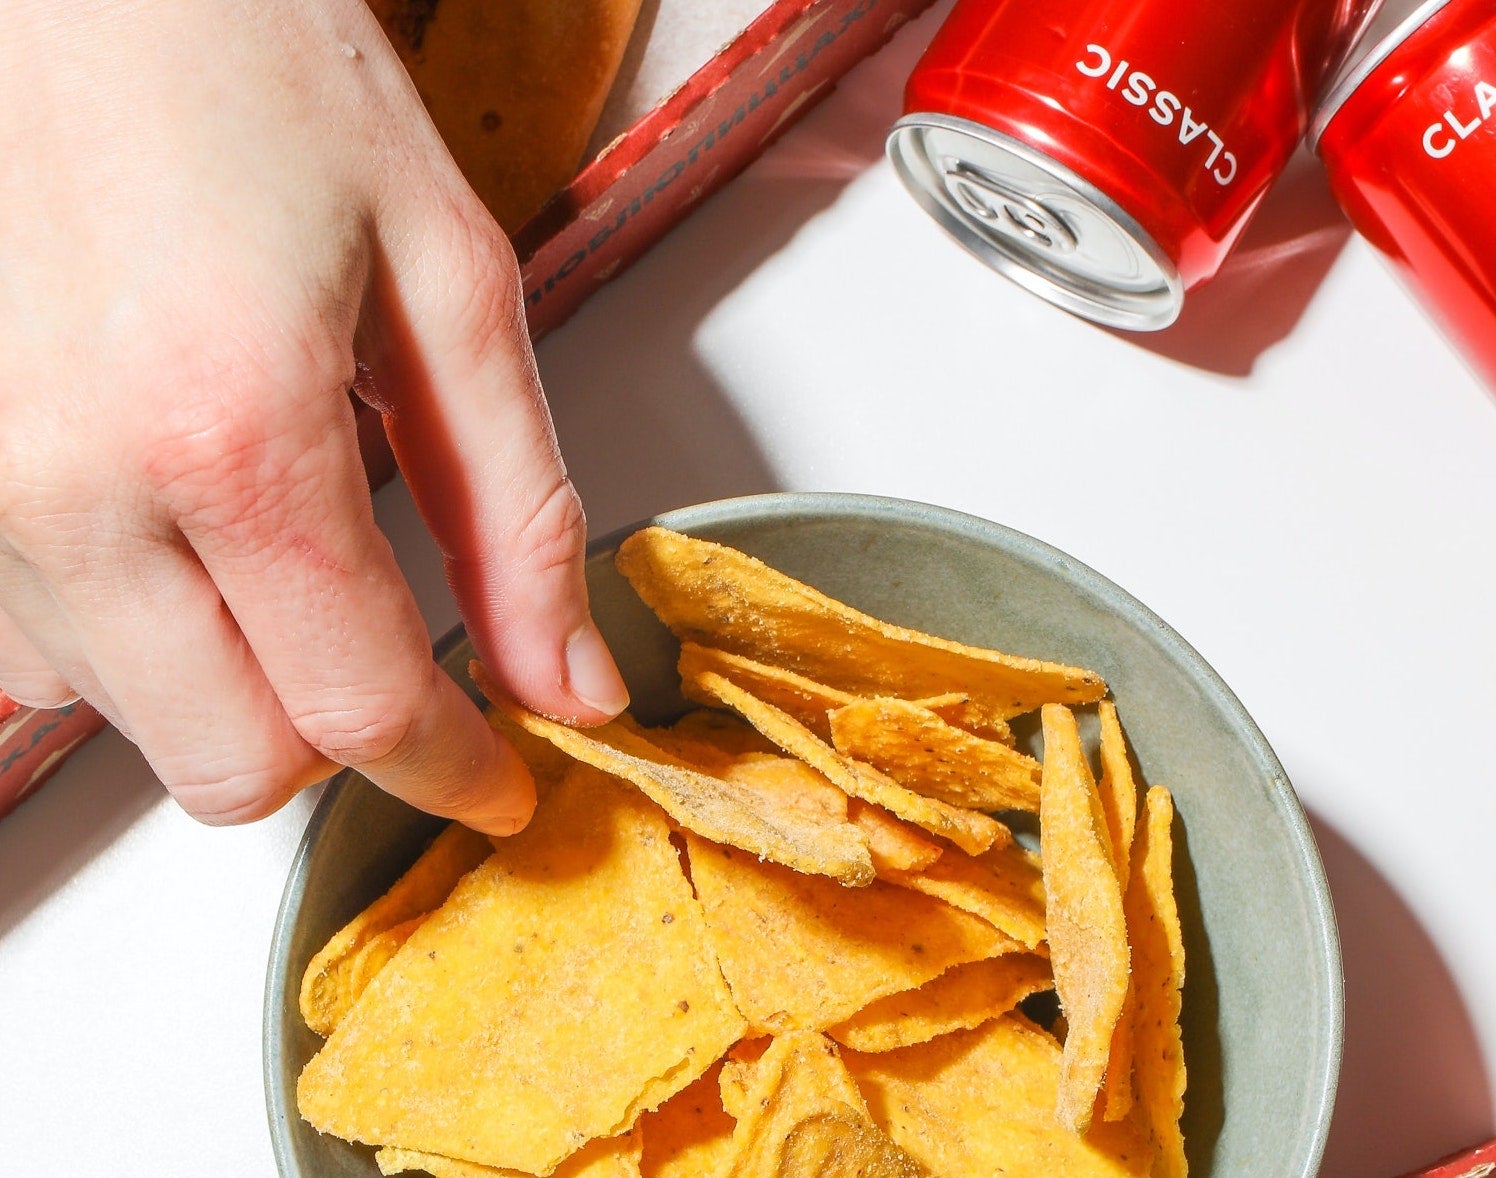 hand reaching into chips in a bowl, with cans of cola on the side